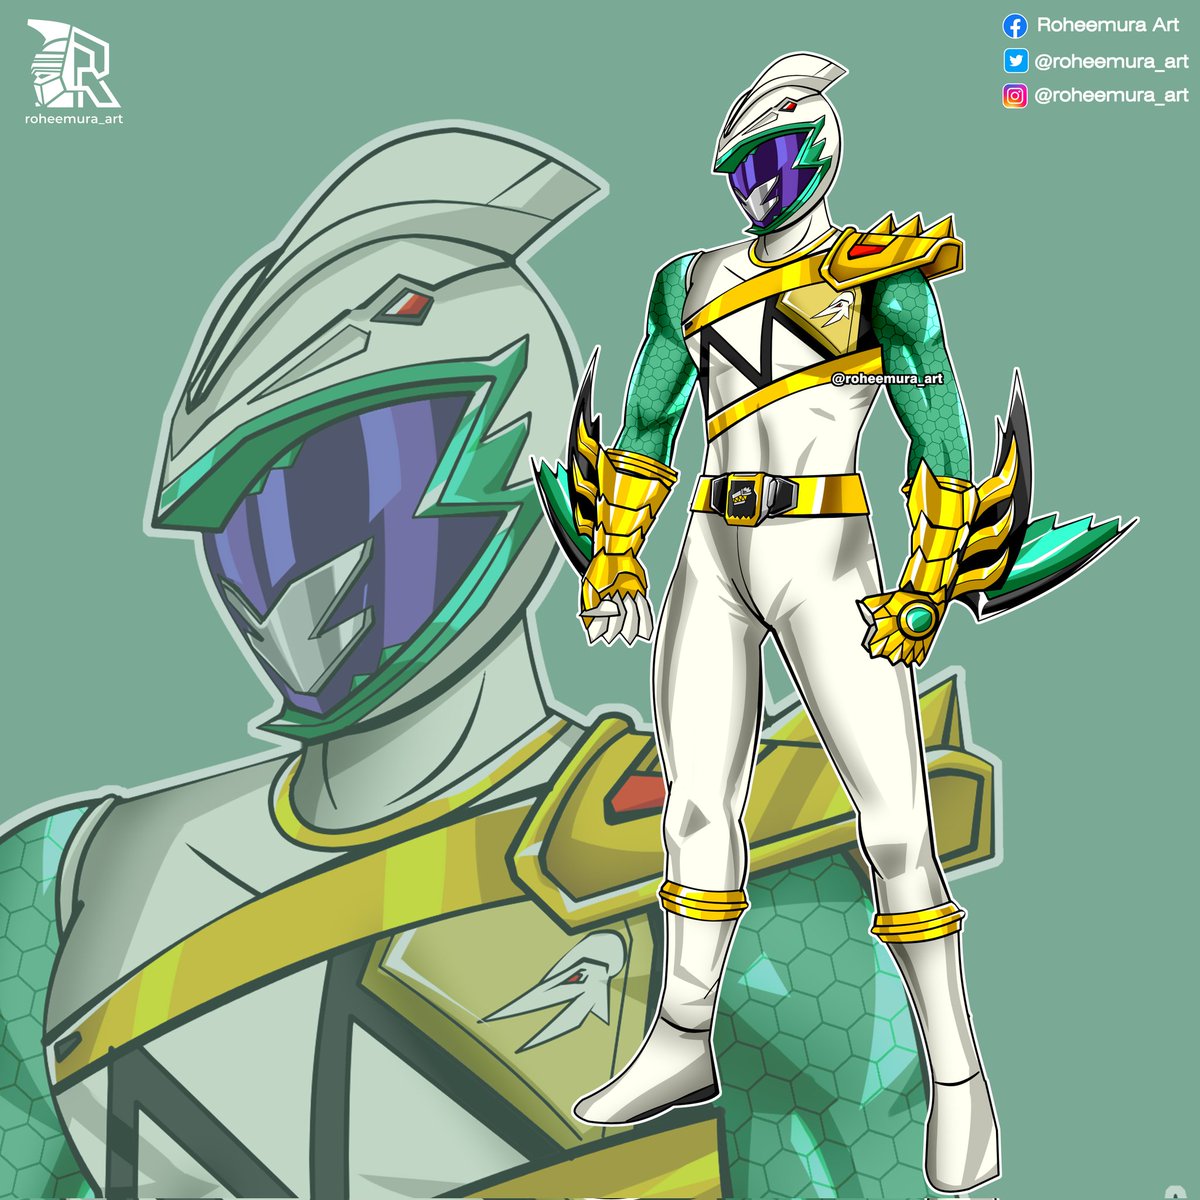 Commission for @hyperdragoonhx 
Dino Charge Hyper Ranger
The design is based on Kryptodrakon, one of the pterodactyloid pterosaurs... 

#supersentai #特撮
#tokusatsu #powerrangers #mightymorphinpowerrangers #powerrangersdinocharge
#dinocharge